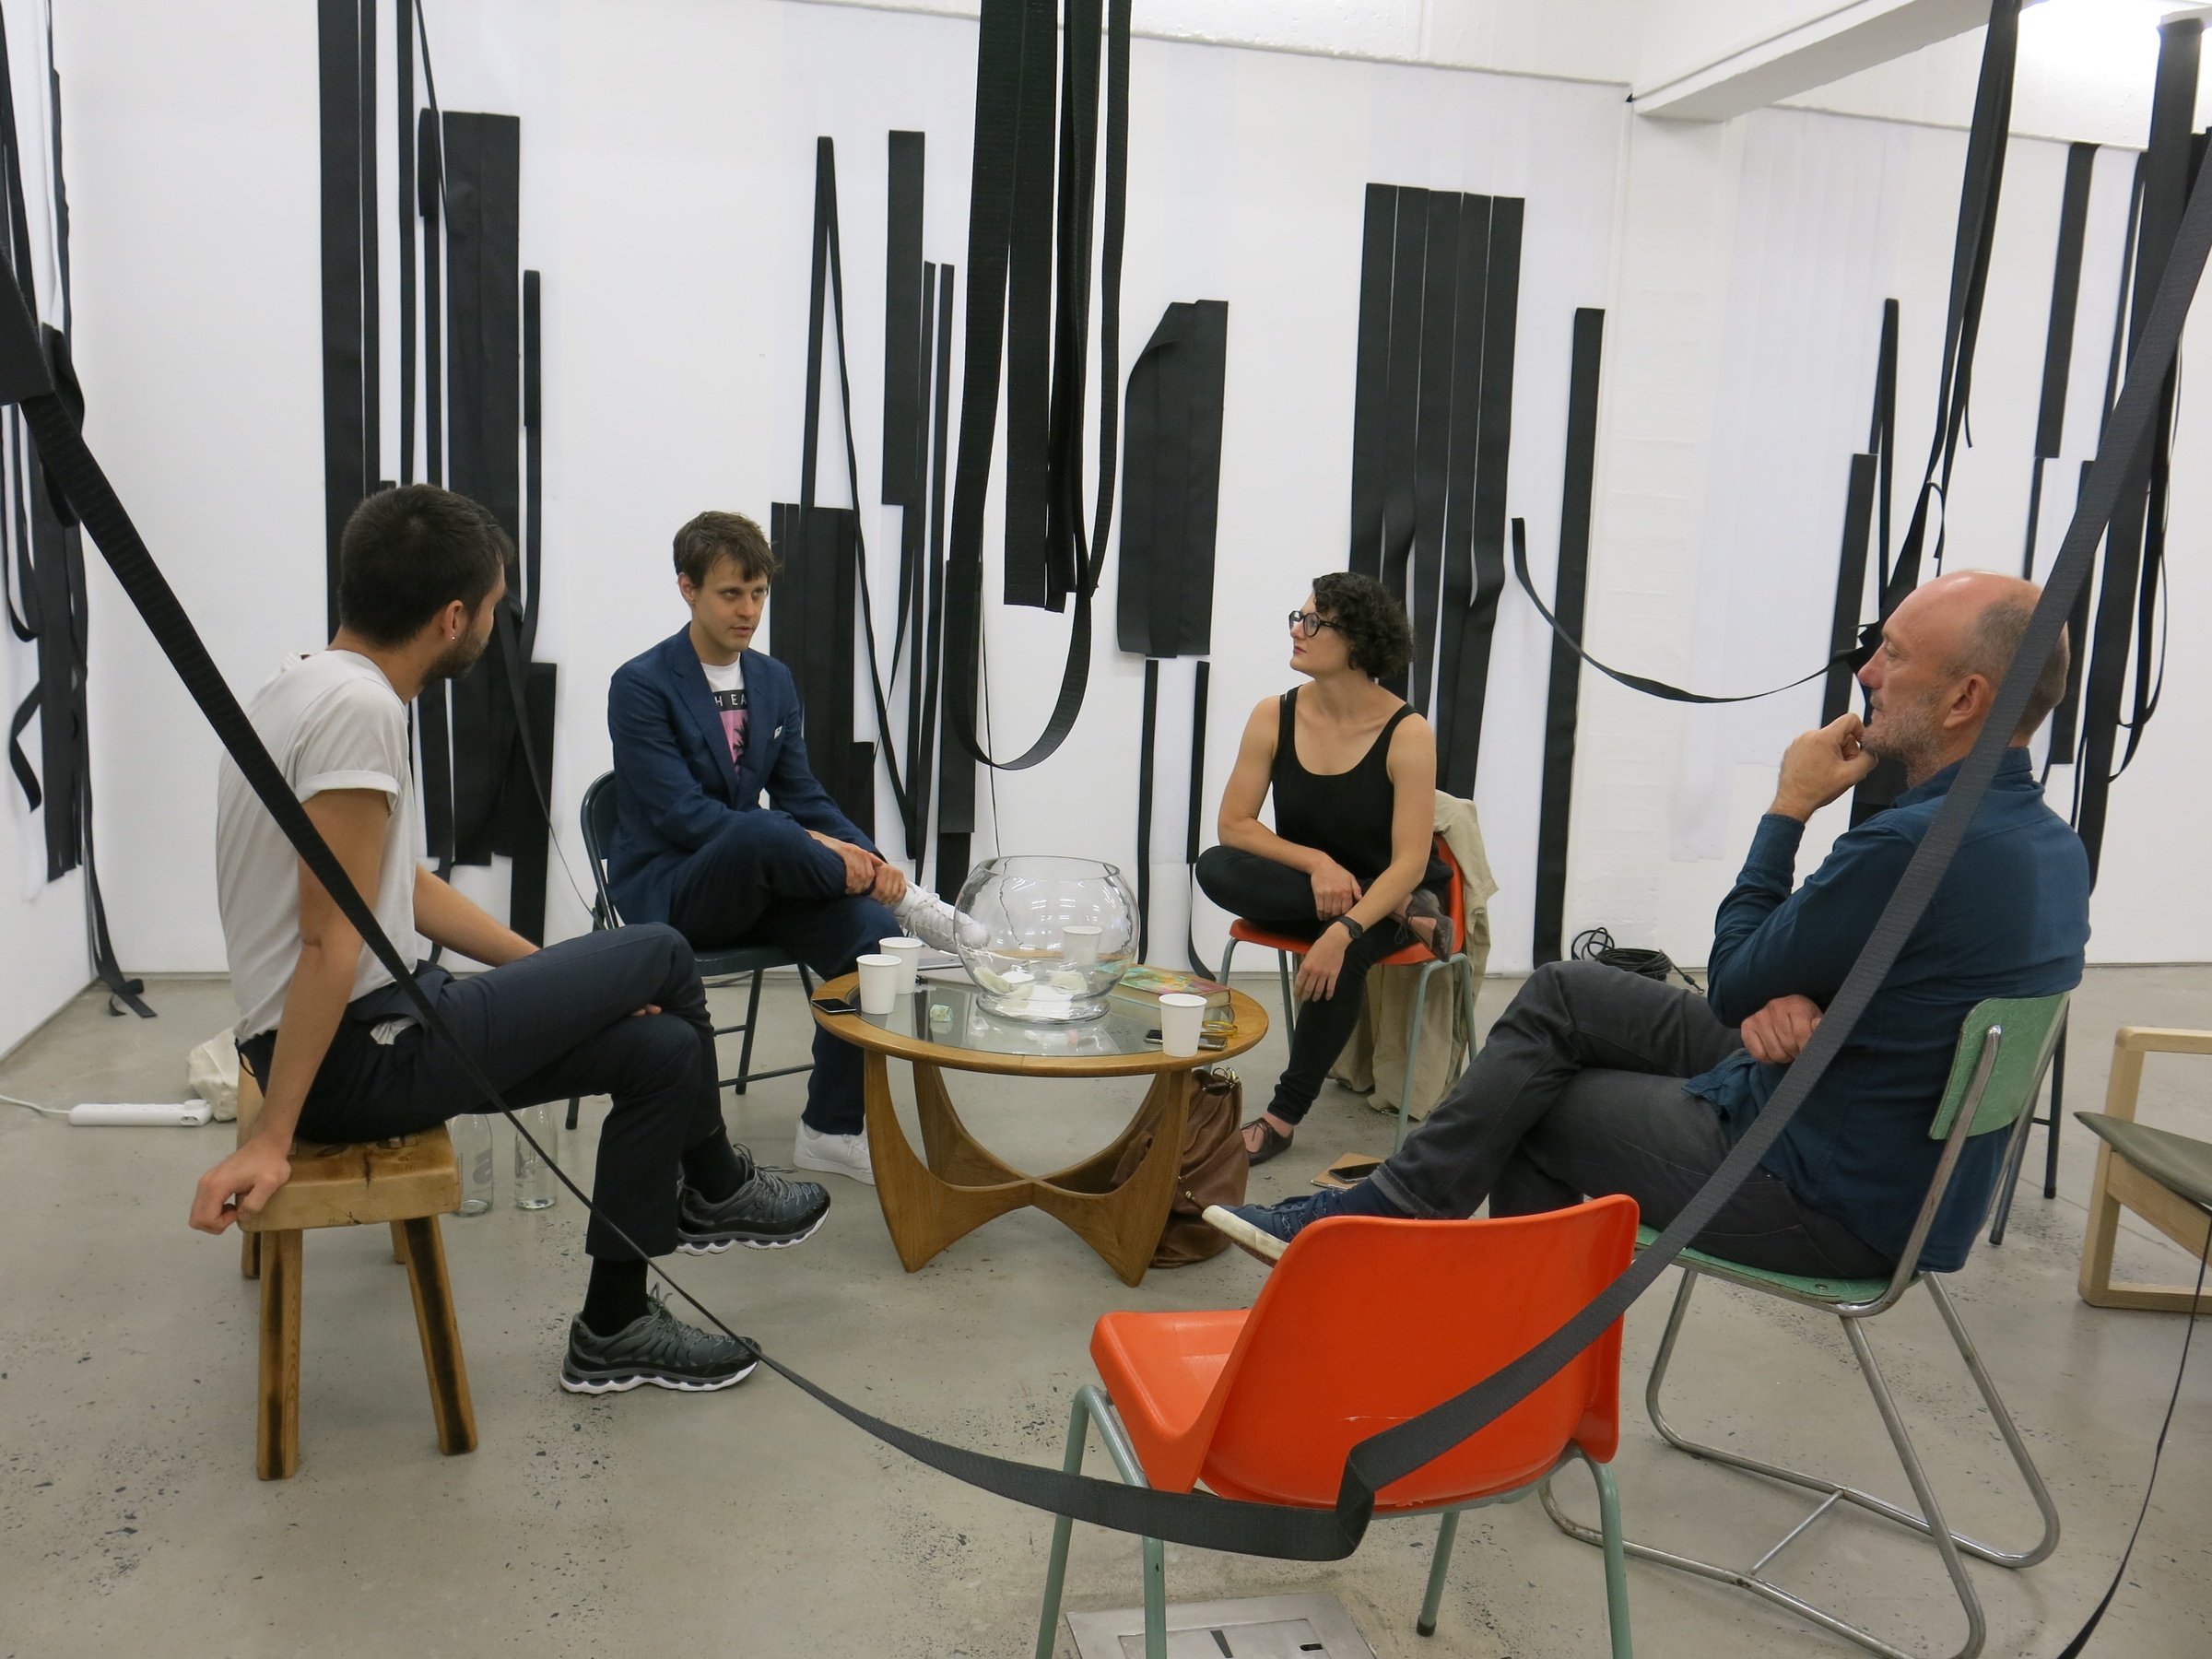 Process photograph from the ‘Dream Works’ event on A4’s ground floor. Sitting among Unathi Mkonto’s interactive velcro installation ‘AVOID’, participants Simon Asencio, Adriano Wilfert Jansen, Anthea Buys and Sean O’Toole are seated around a coffee table.
